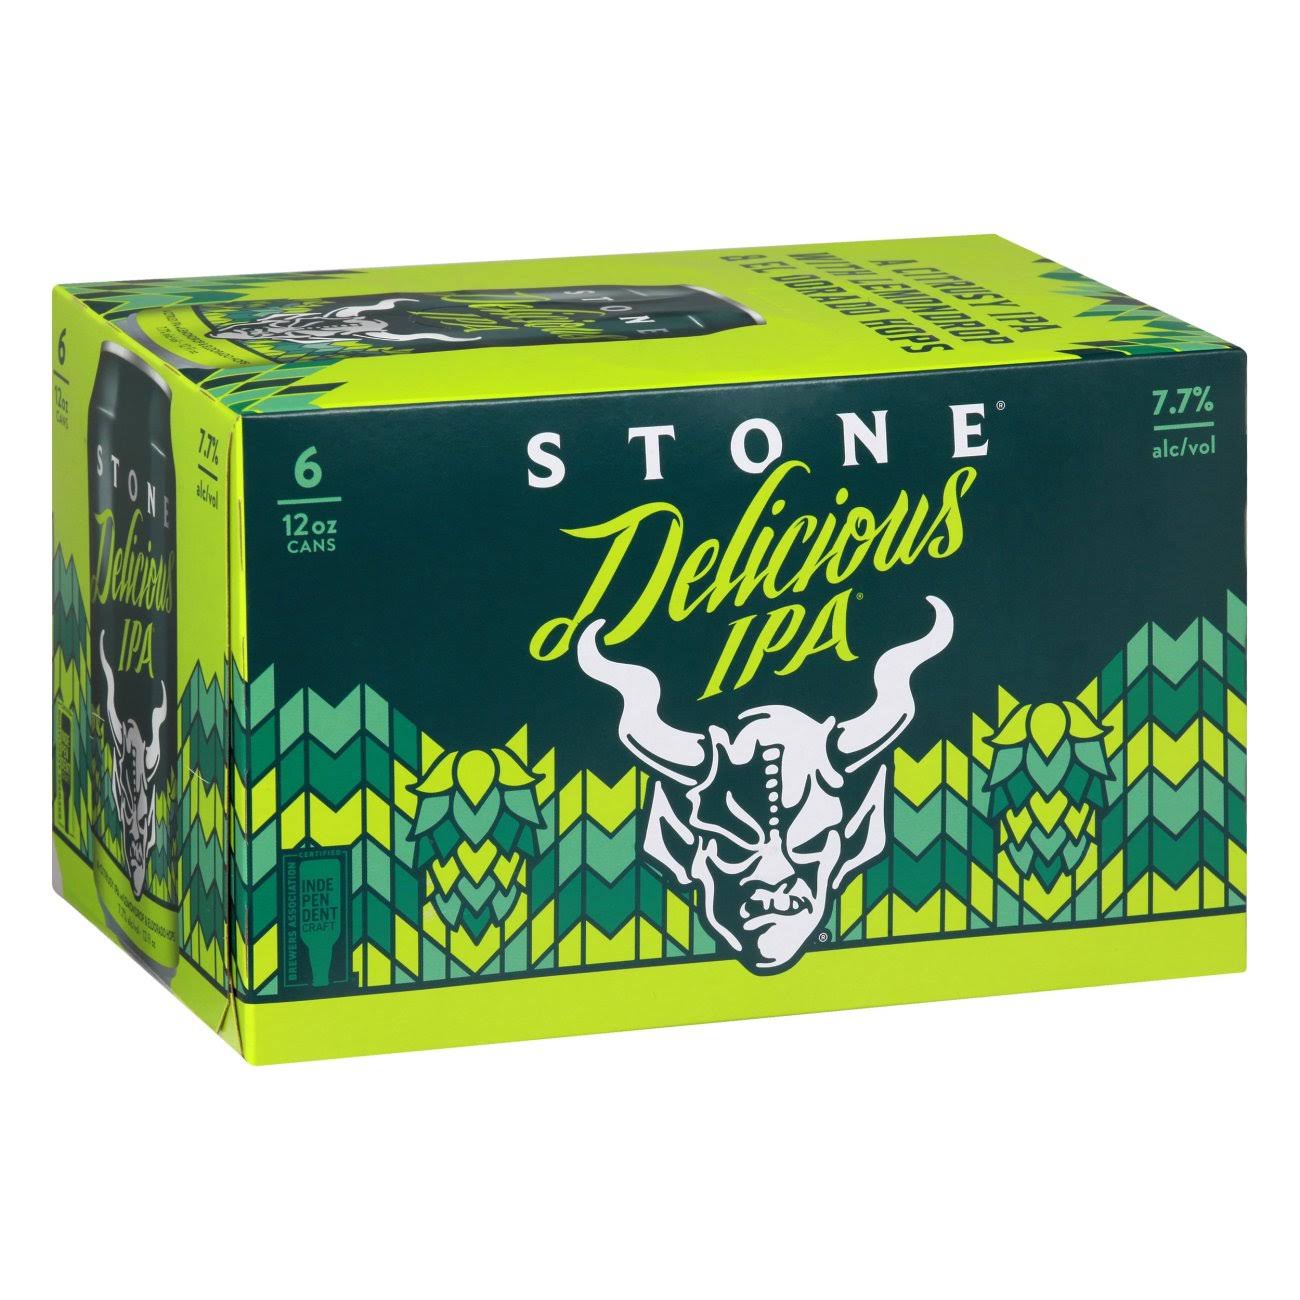 Stone Beer, Delicious IPA - 6 pack, 12 fl oz cans